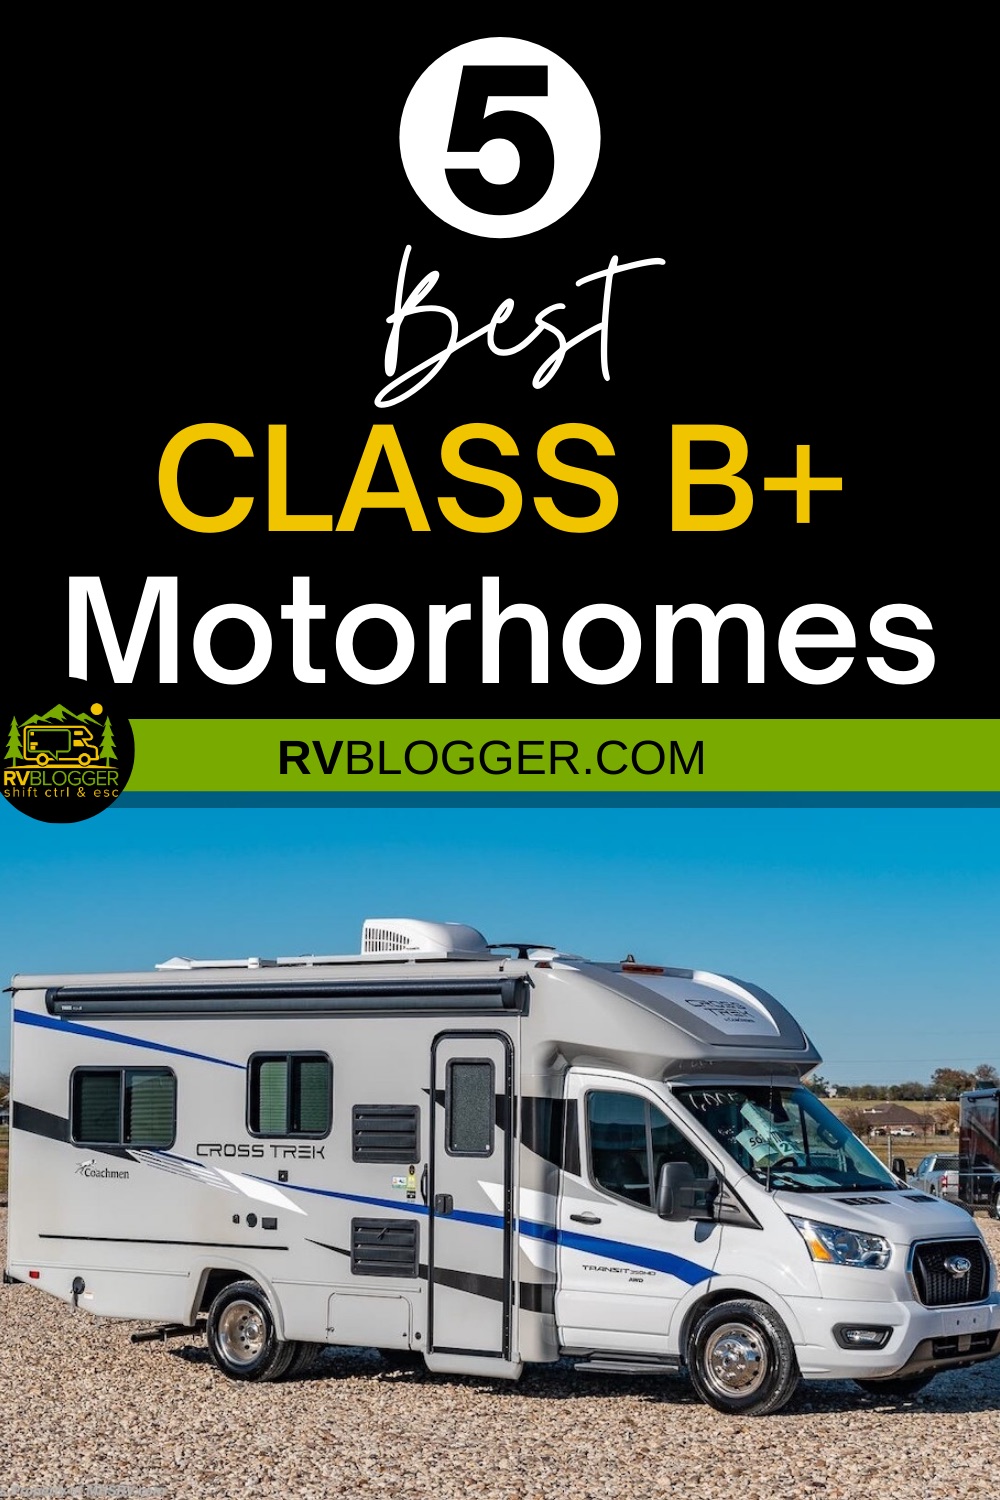 Your Guide To The 5 Best Class B Plus Motorhomes – Rvblogger